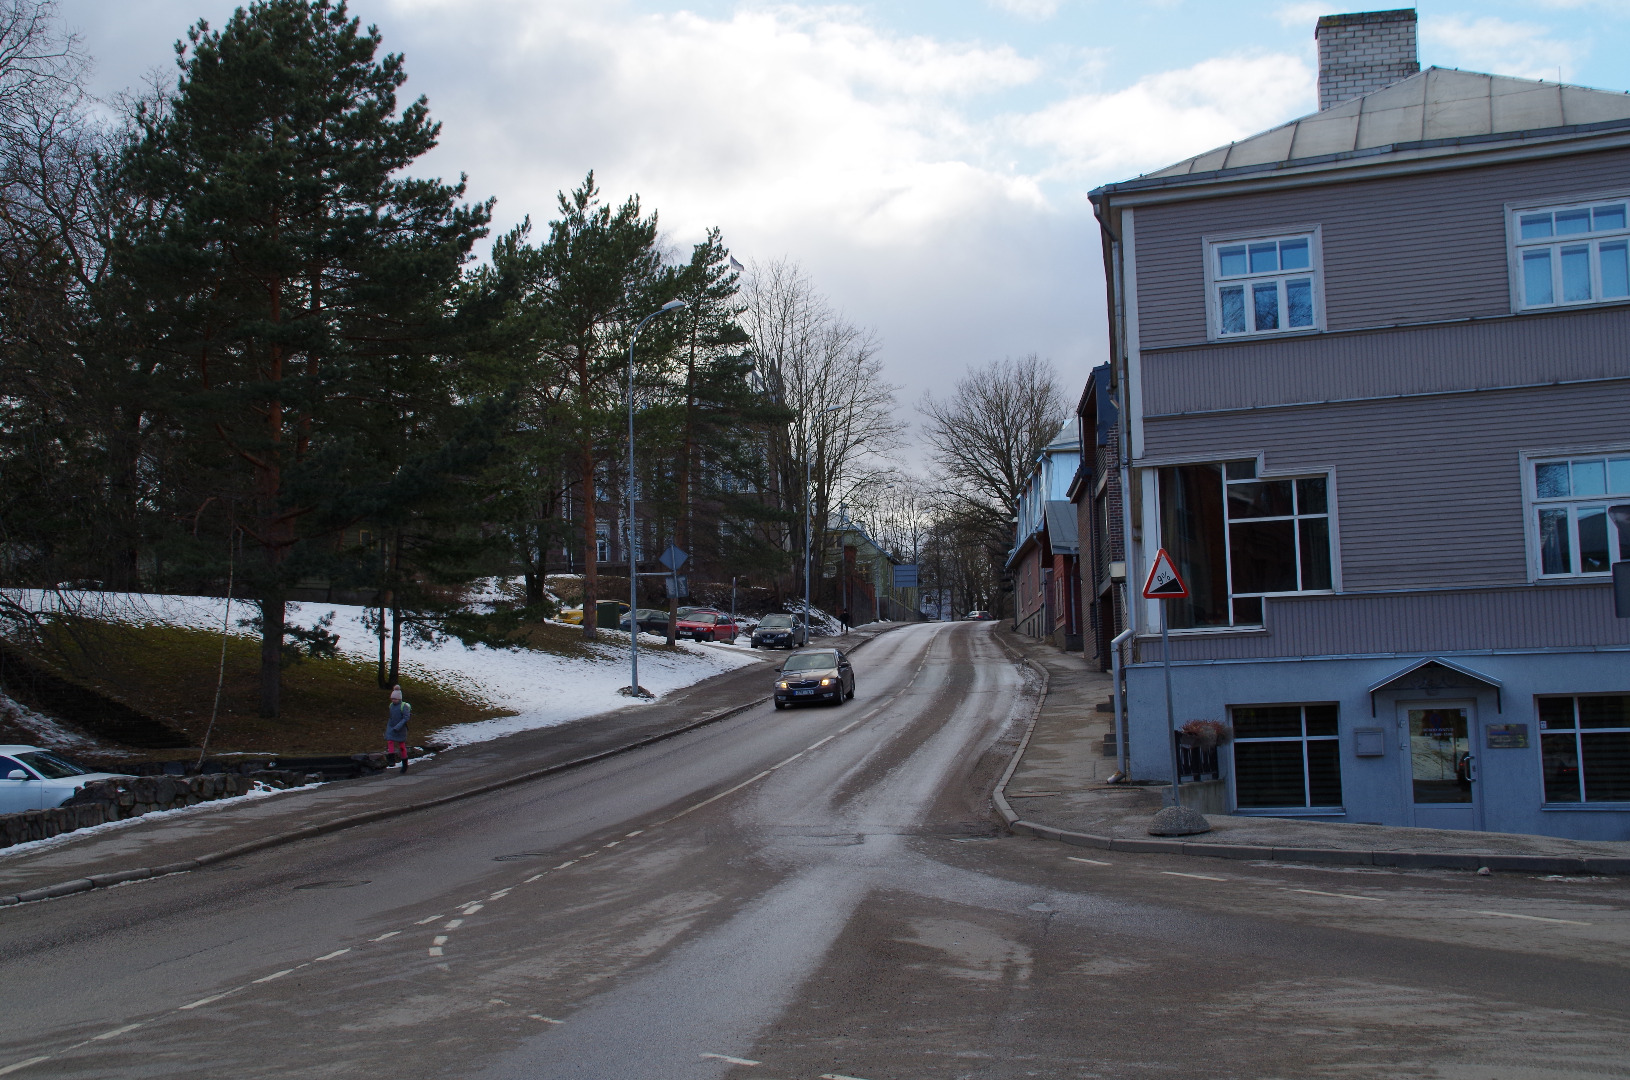 View of Jakob Street and Mountain rephoto